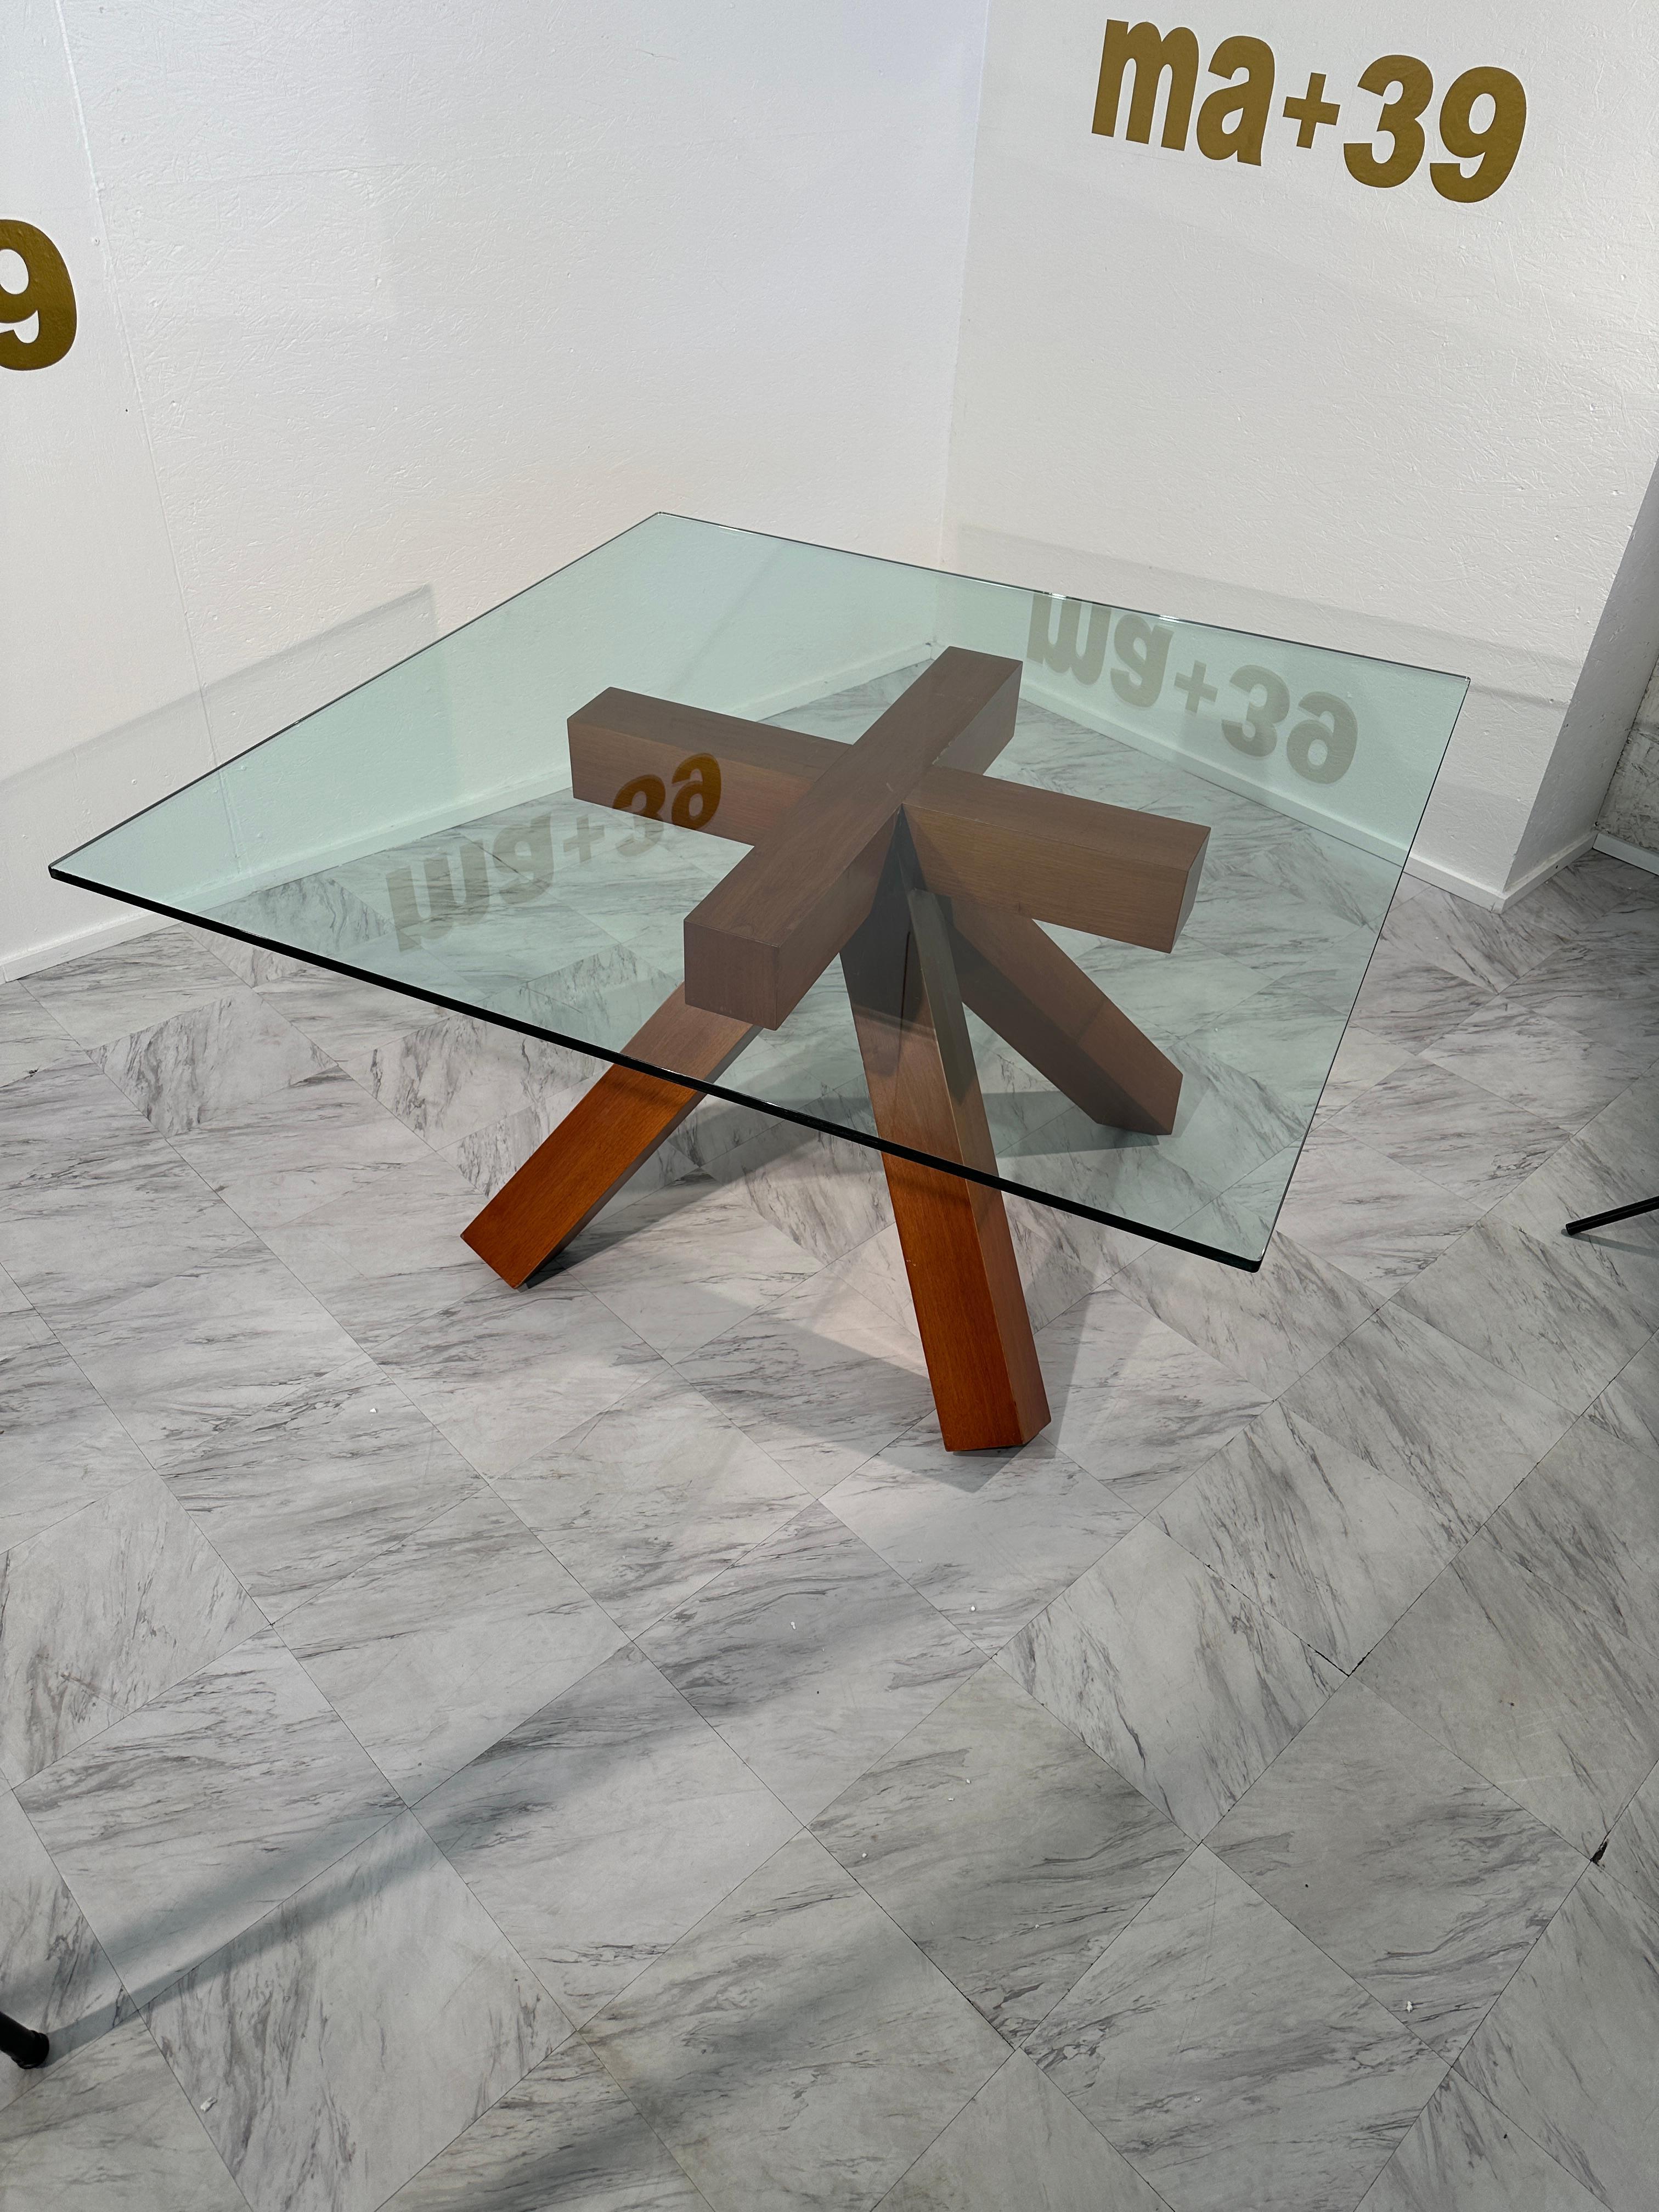 The Vintage Italian Nutwood and Glass Dining Table, known as La Rotonda and designed by Mario Bellini for Cassina in the 1970s, is a stunning representation of mid-century modern design. The table features a square glass top that allows for a clear